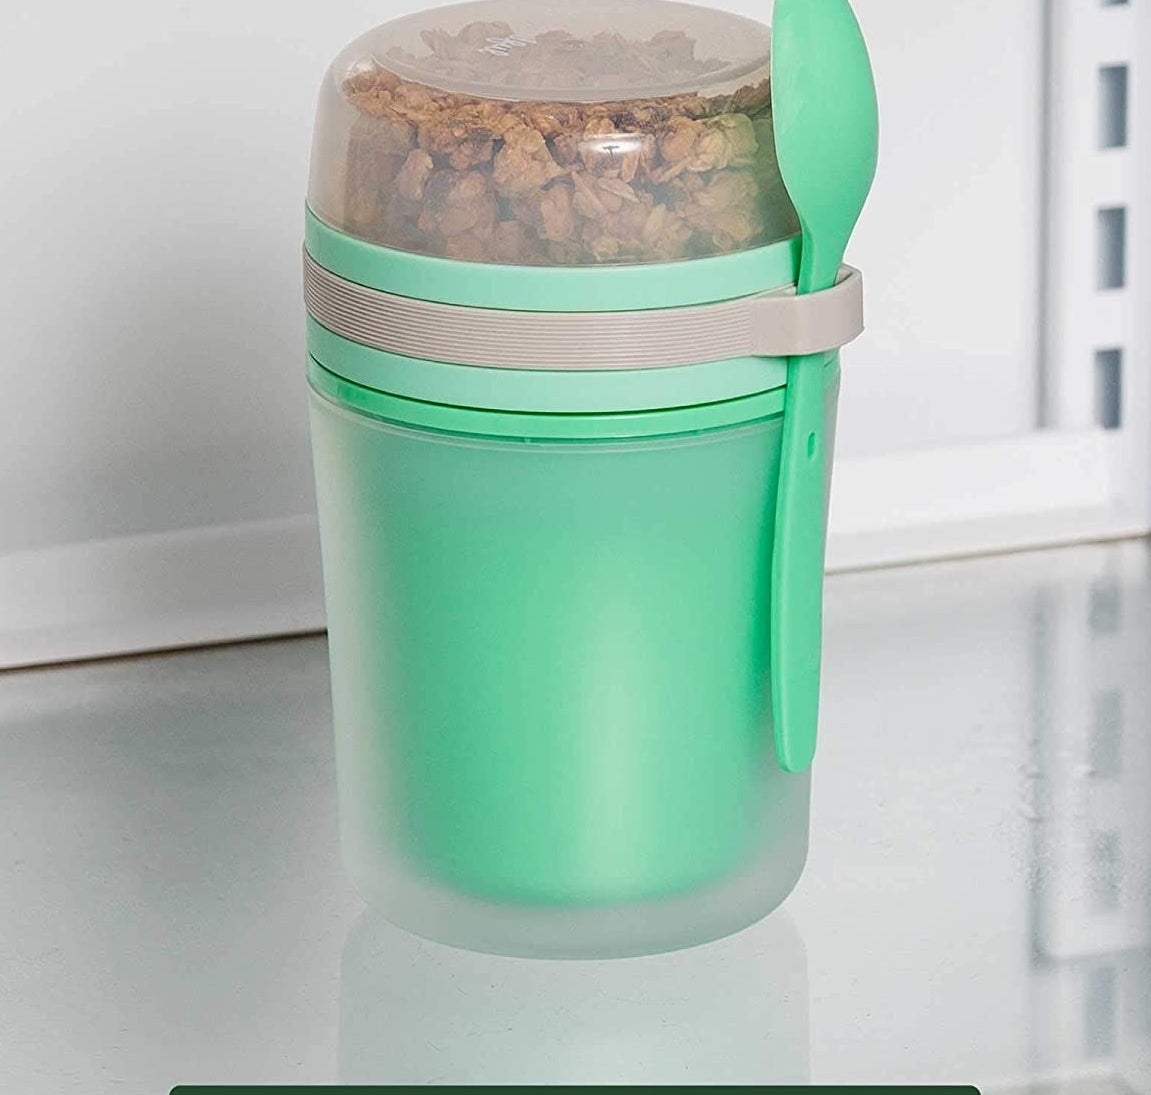 the green yogurt container with an attached green spoon and clear top compartment